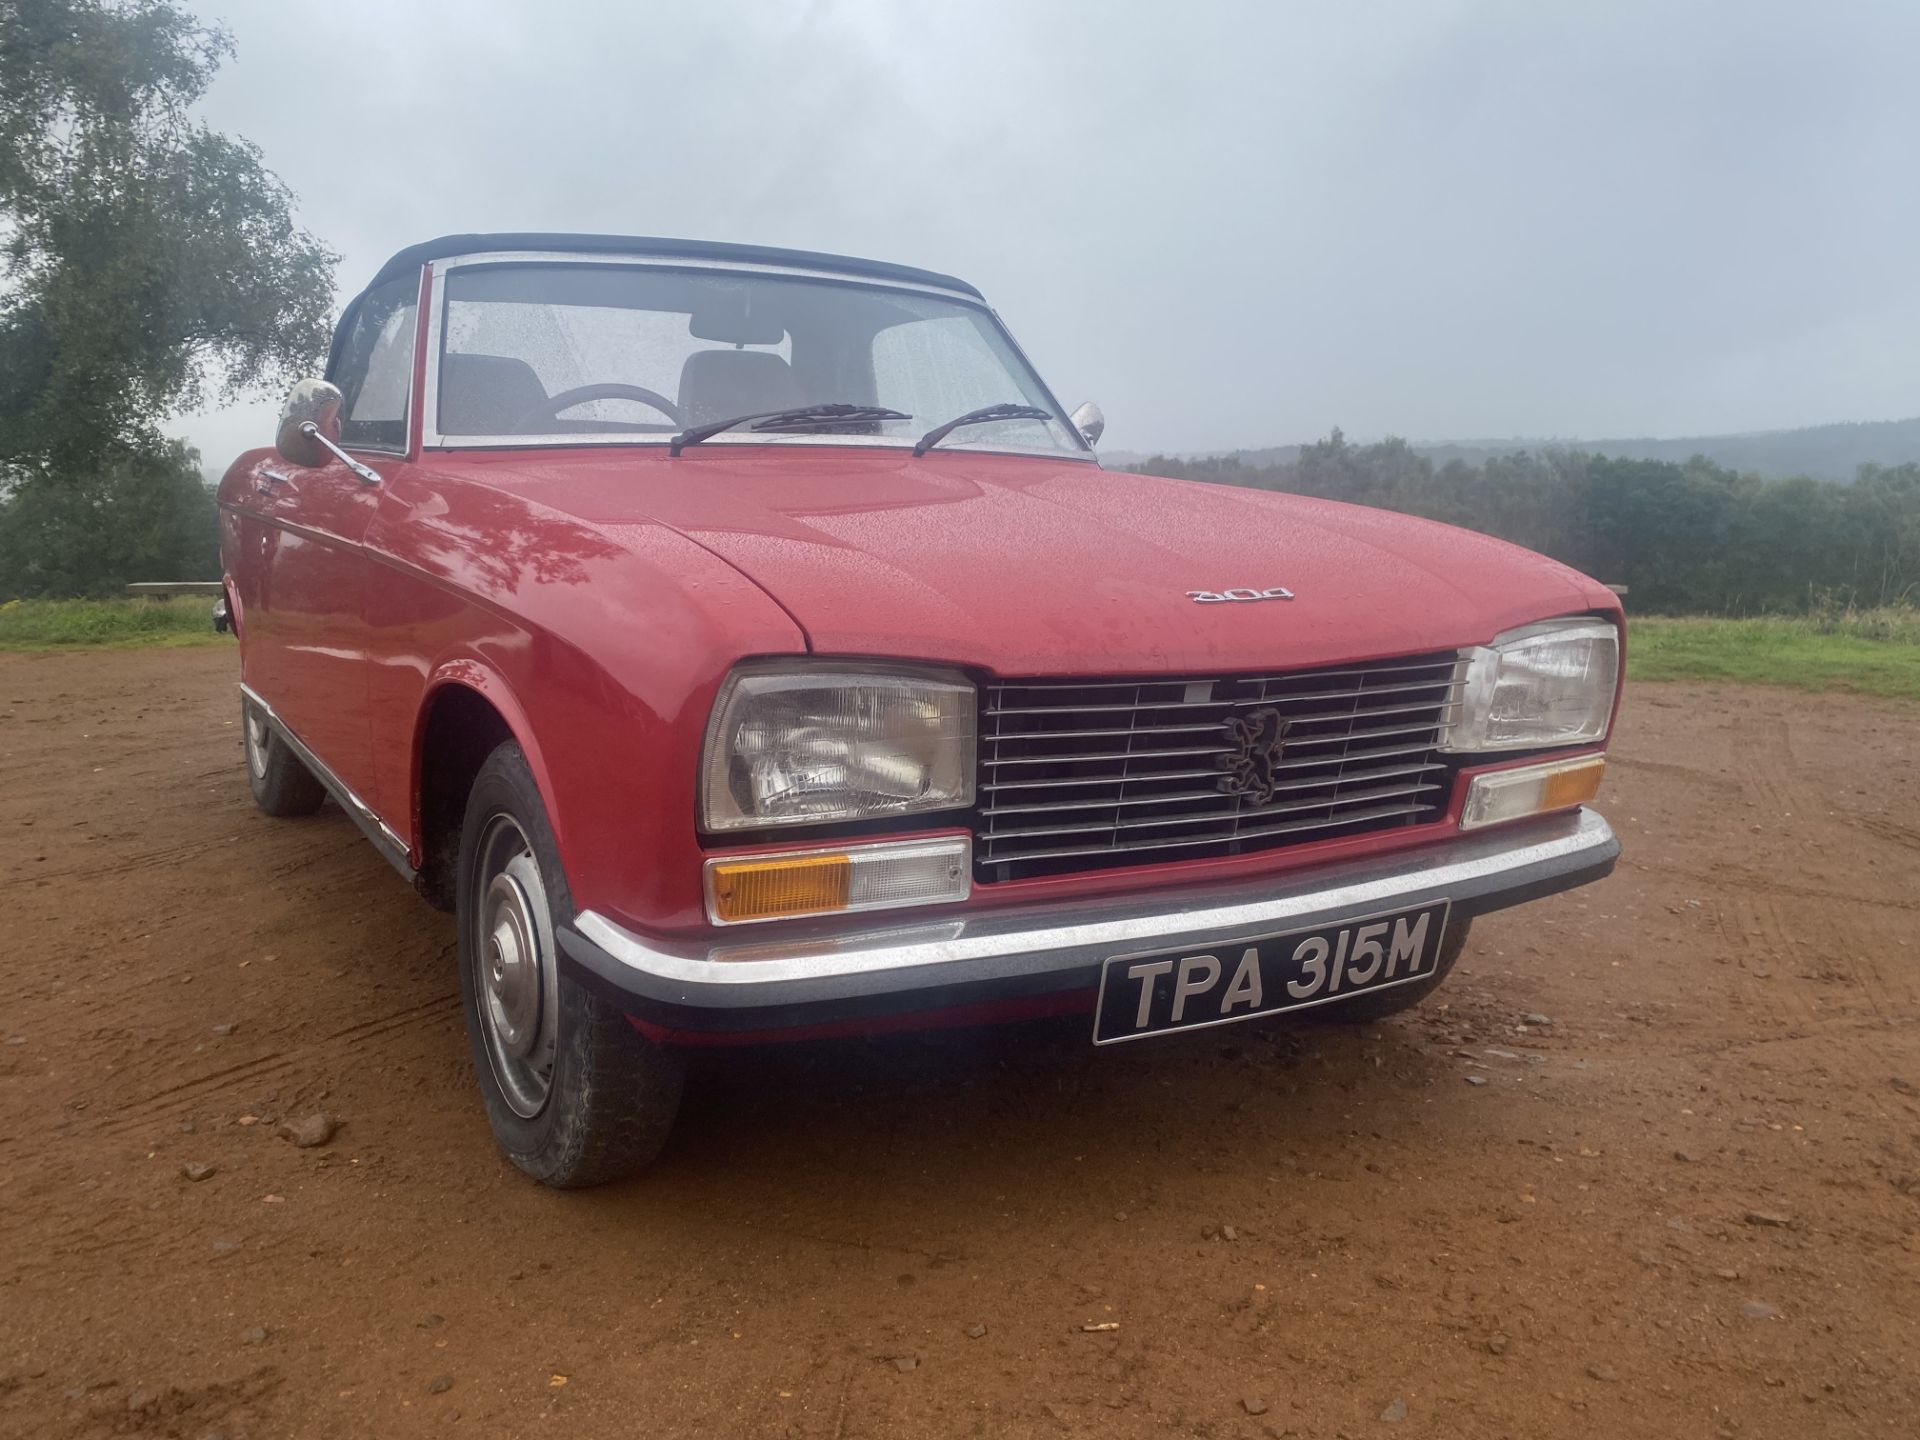 Peugeot 304 Convertible. Registration number: TPA 315M. Rare RHD drive model with 82,696 miles from - Image 11 of 14